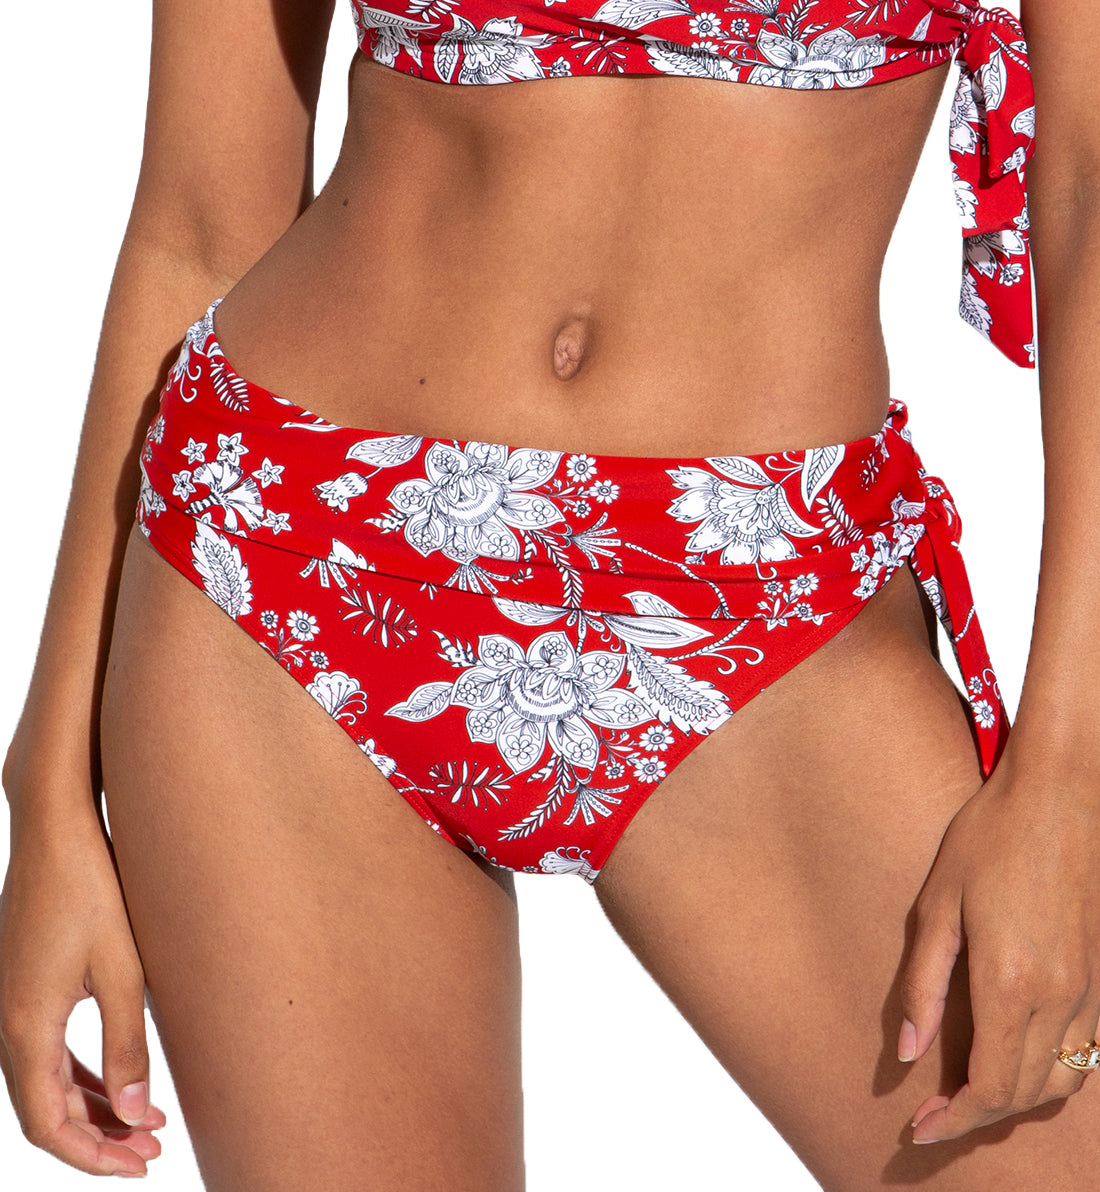 Pour Moi Freedom Tie Fold Over Swim Brief (25503),Small,Red/White - Red/White,Small